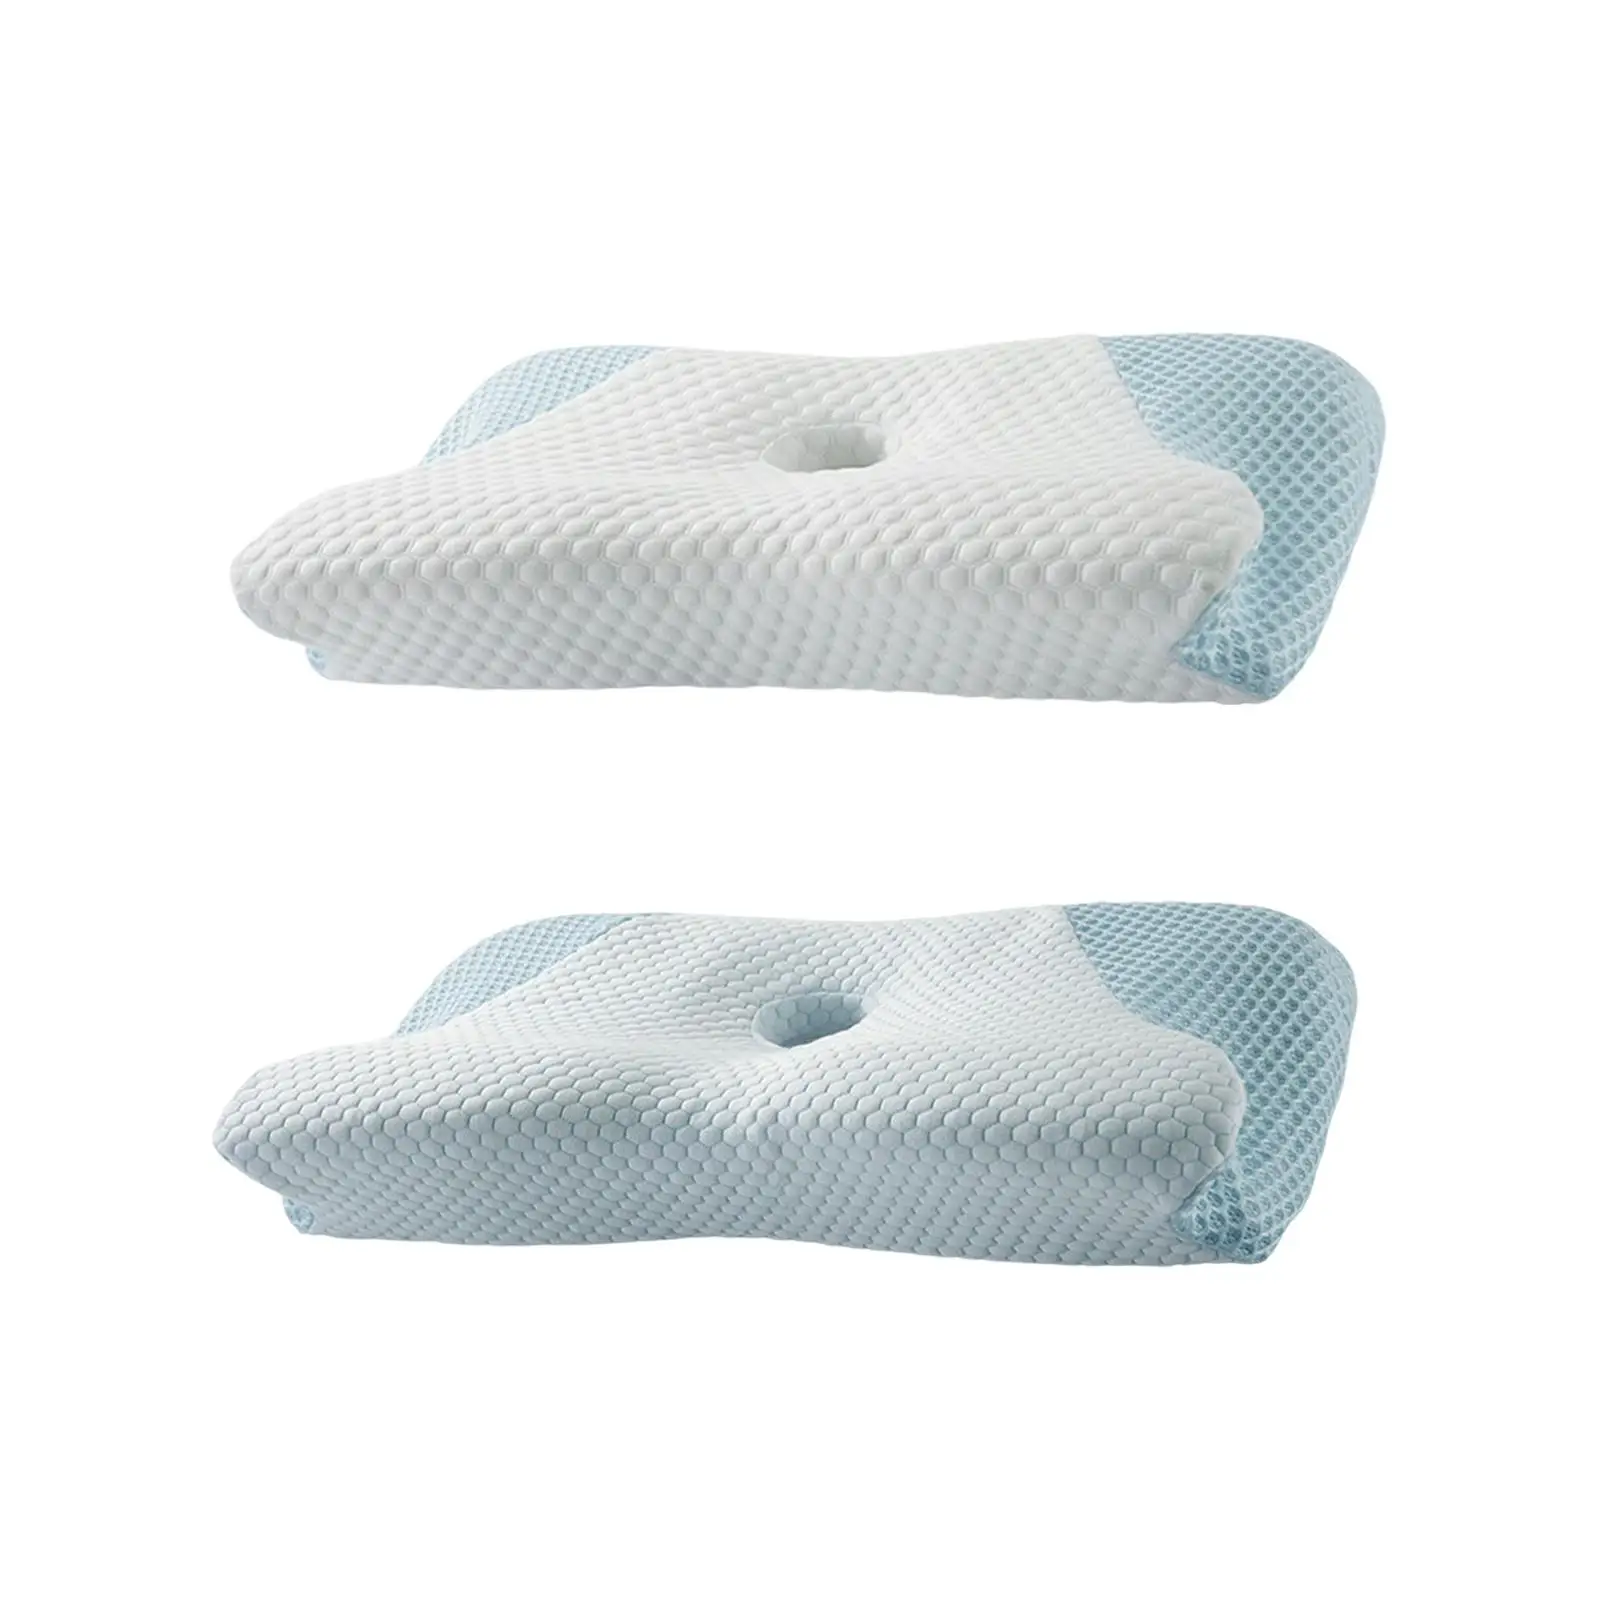 Breathable Sleeping Pillow Reusable Bed Pillow Latex Pillow for Head Gifts